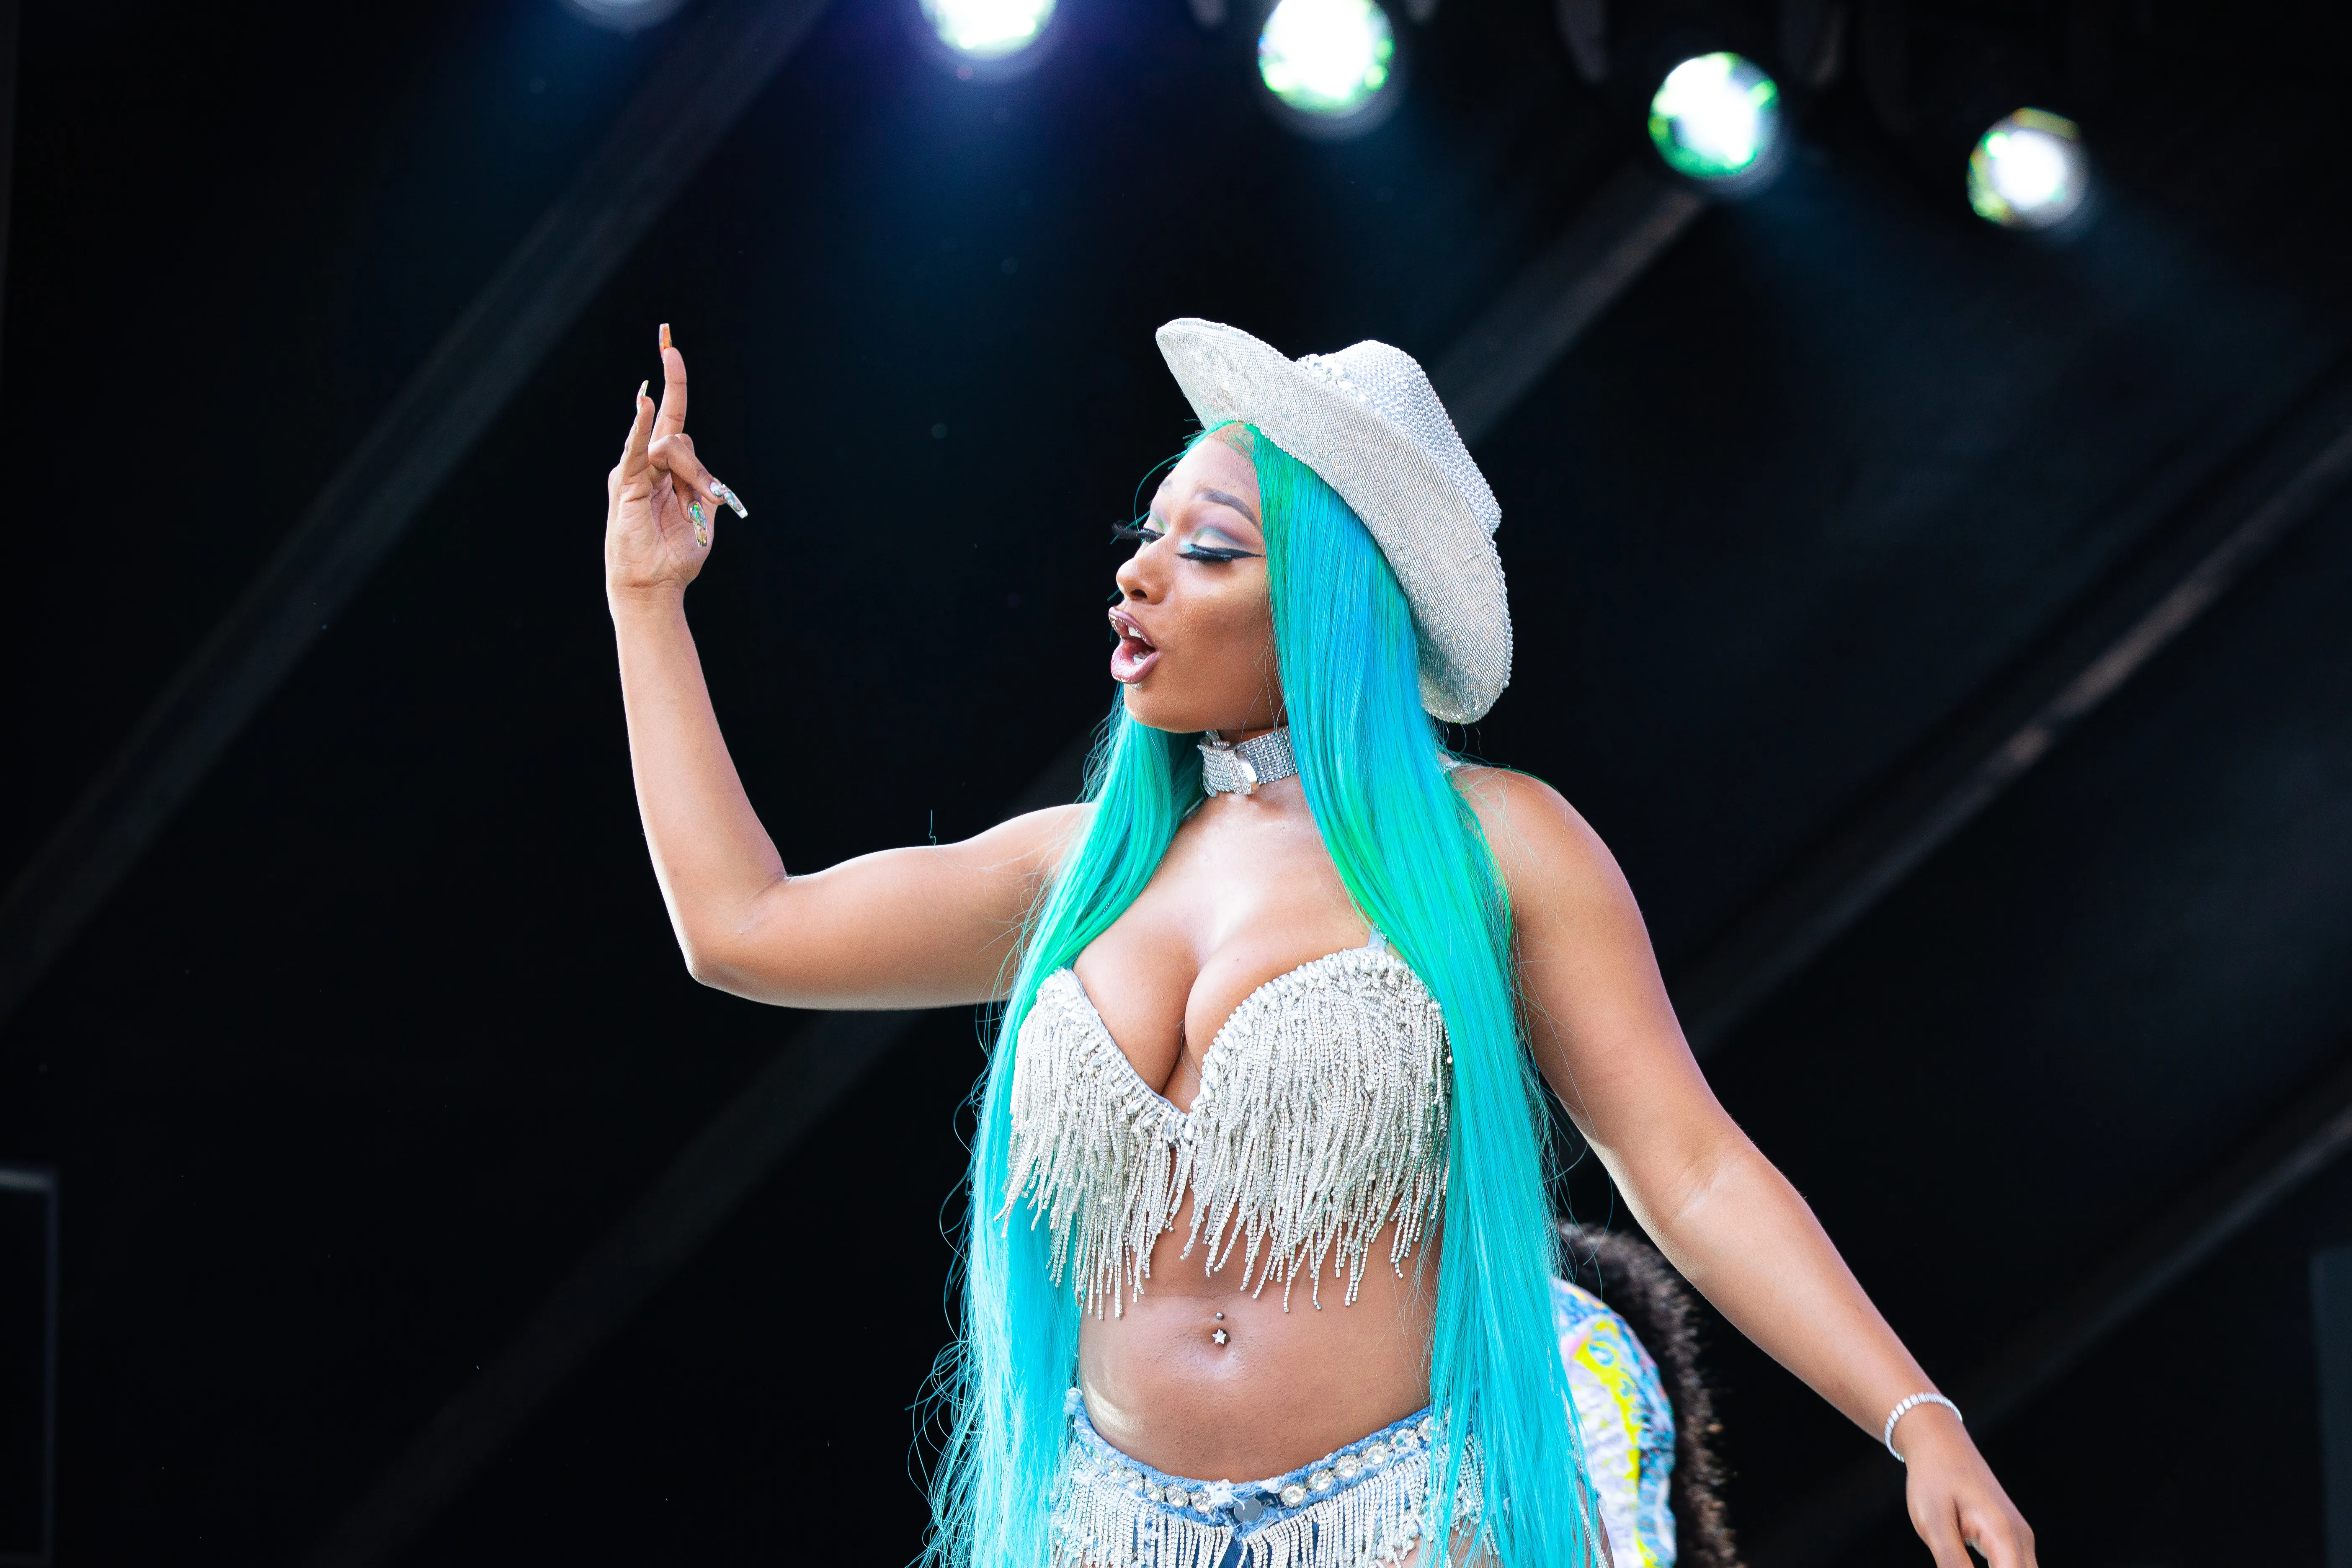 Listen To Megan Thee Stallion's New Song "Girls In The Hood"